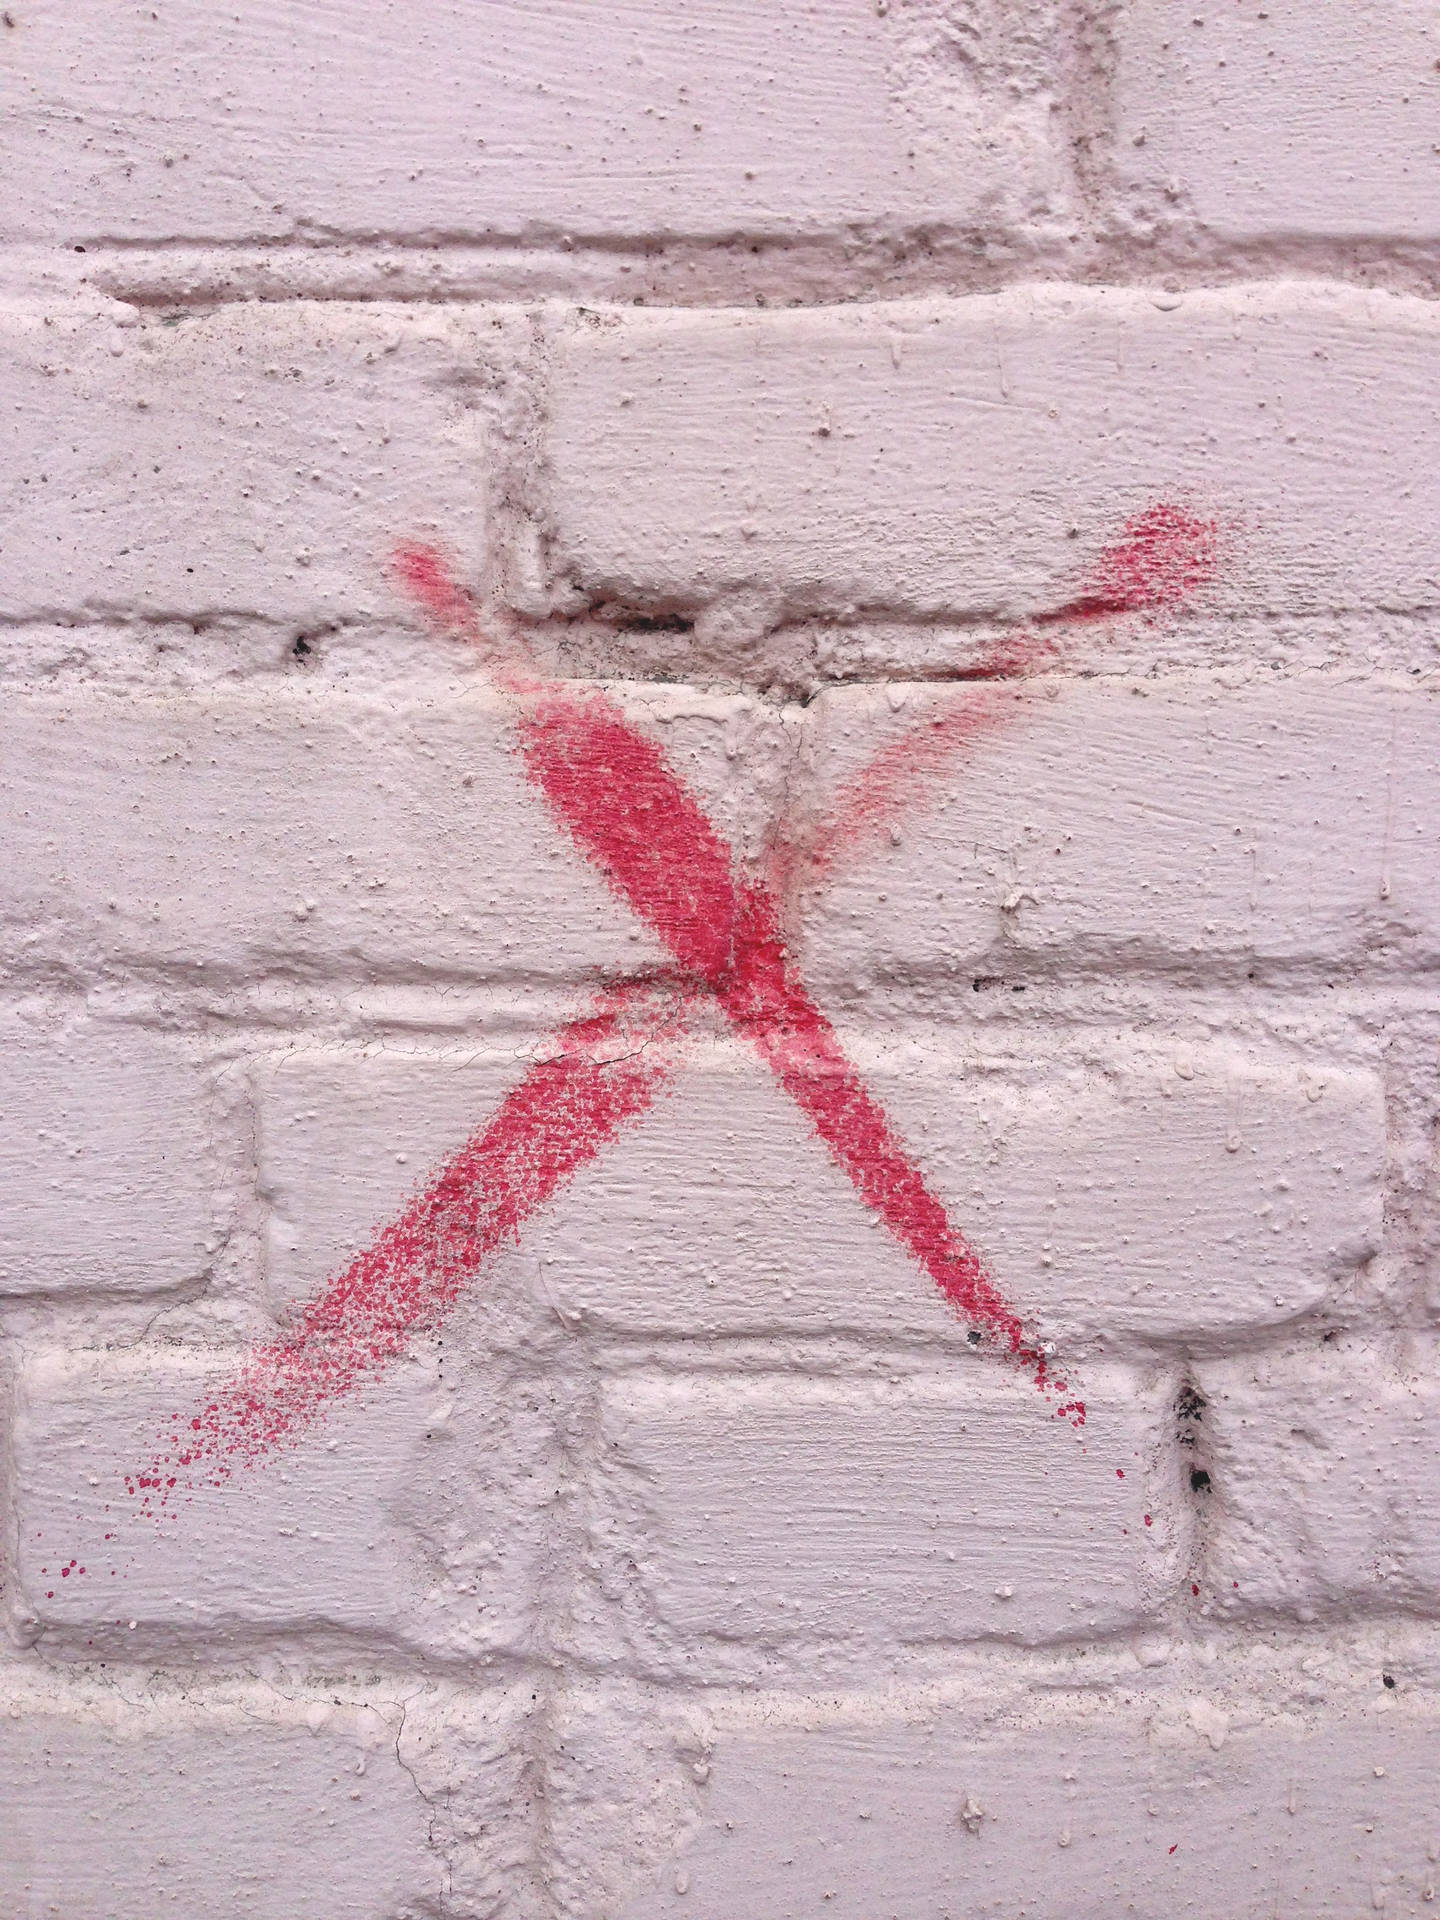 Wallpaper of red x sign as vandalized graffiti on brick wall.